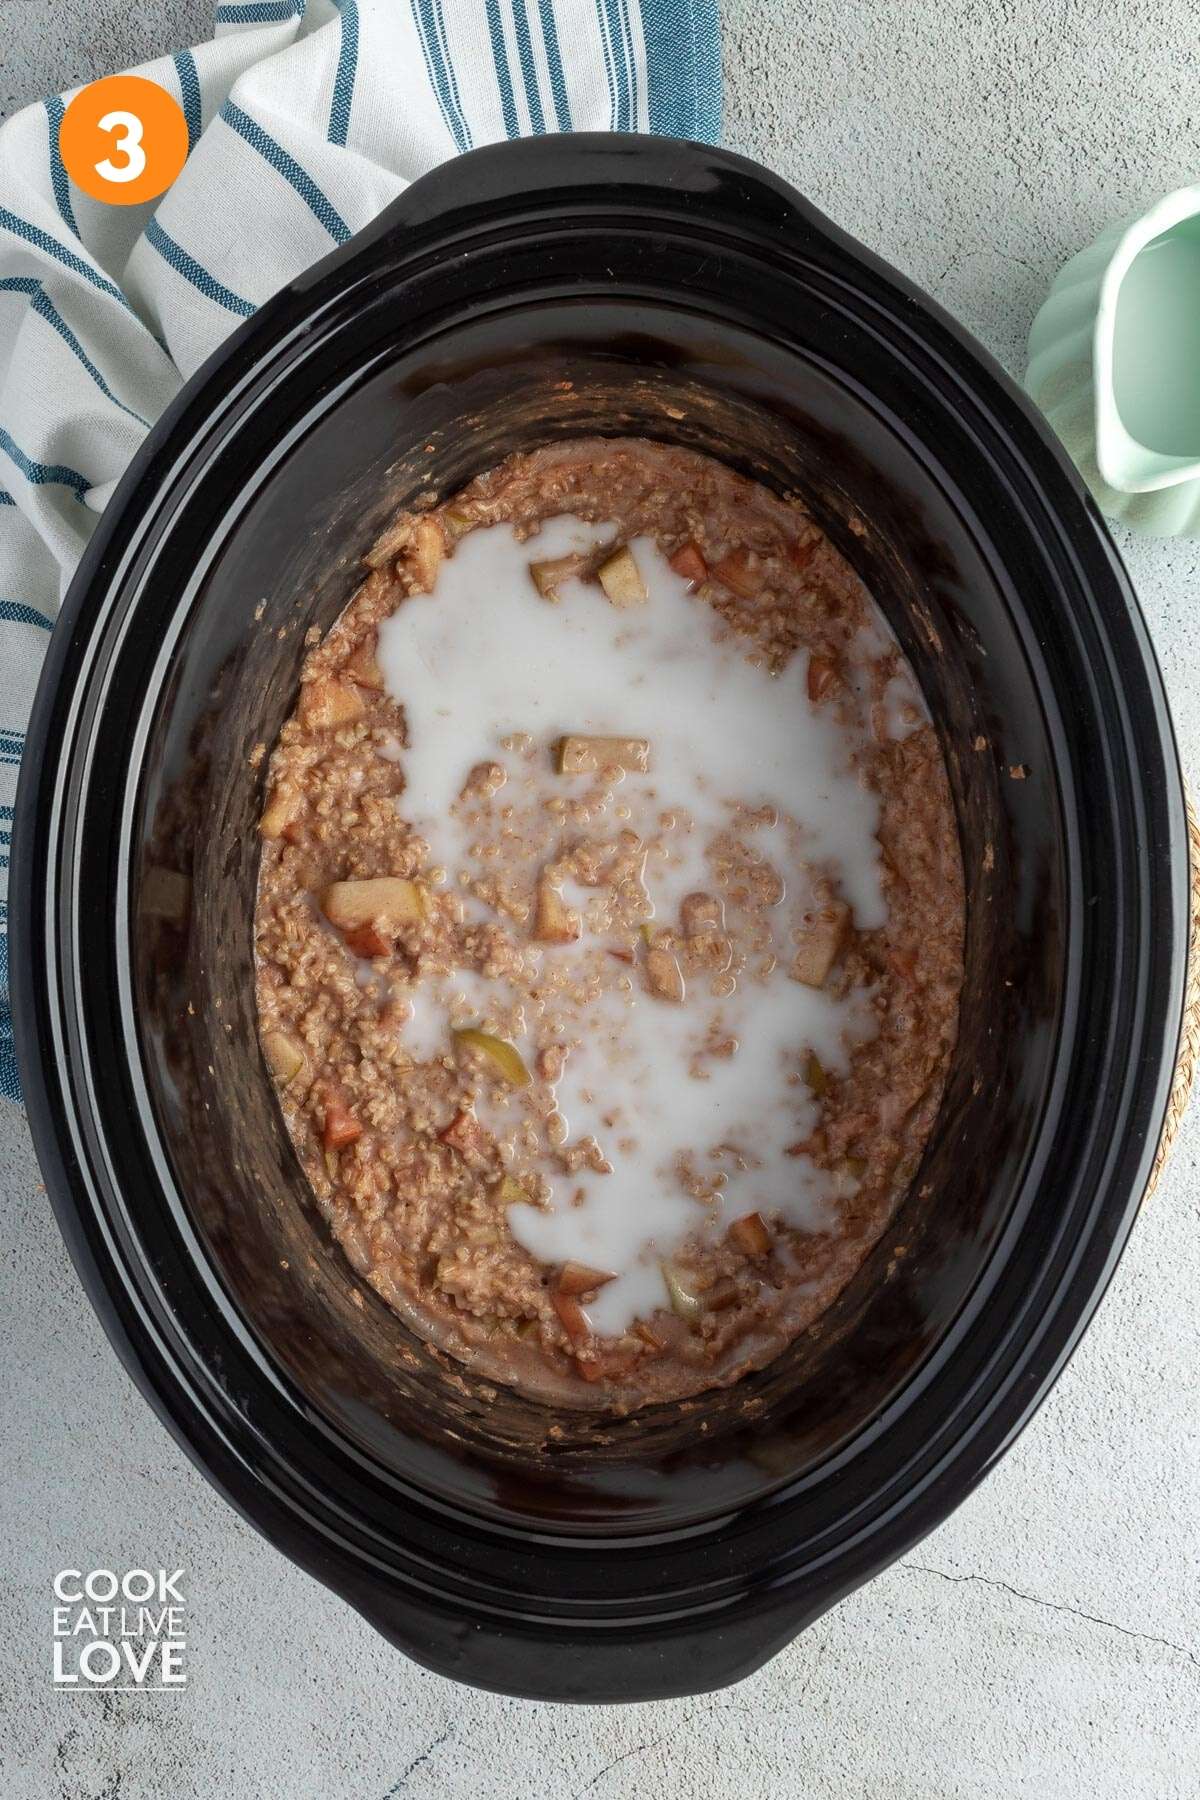 Milk added to the crockpot after the oatmeal is cooked.